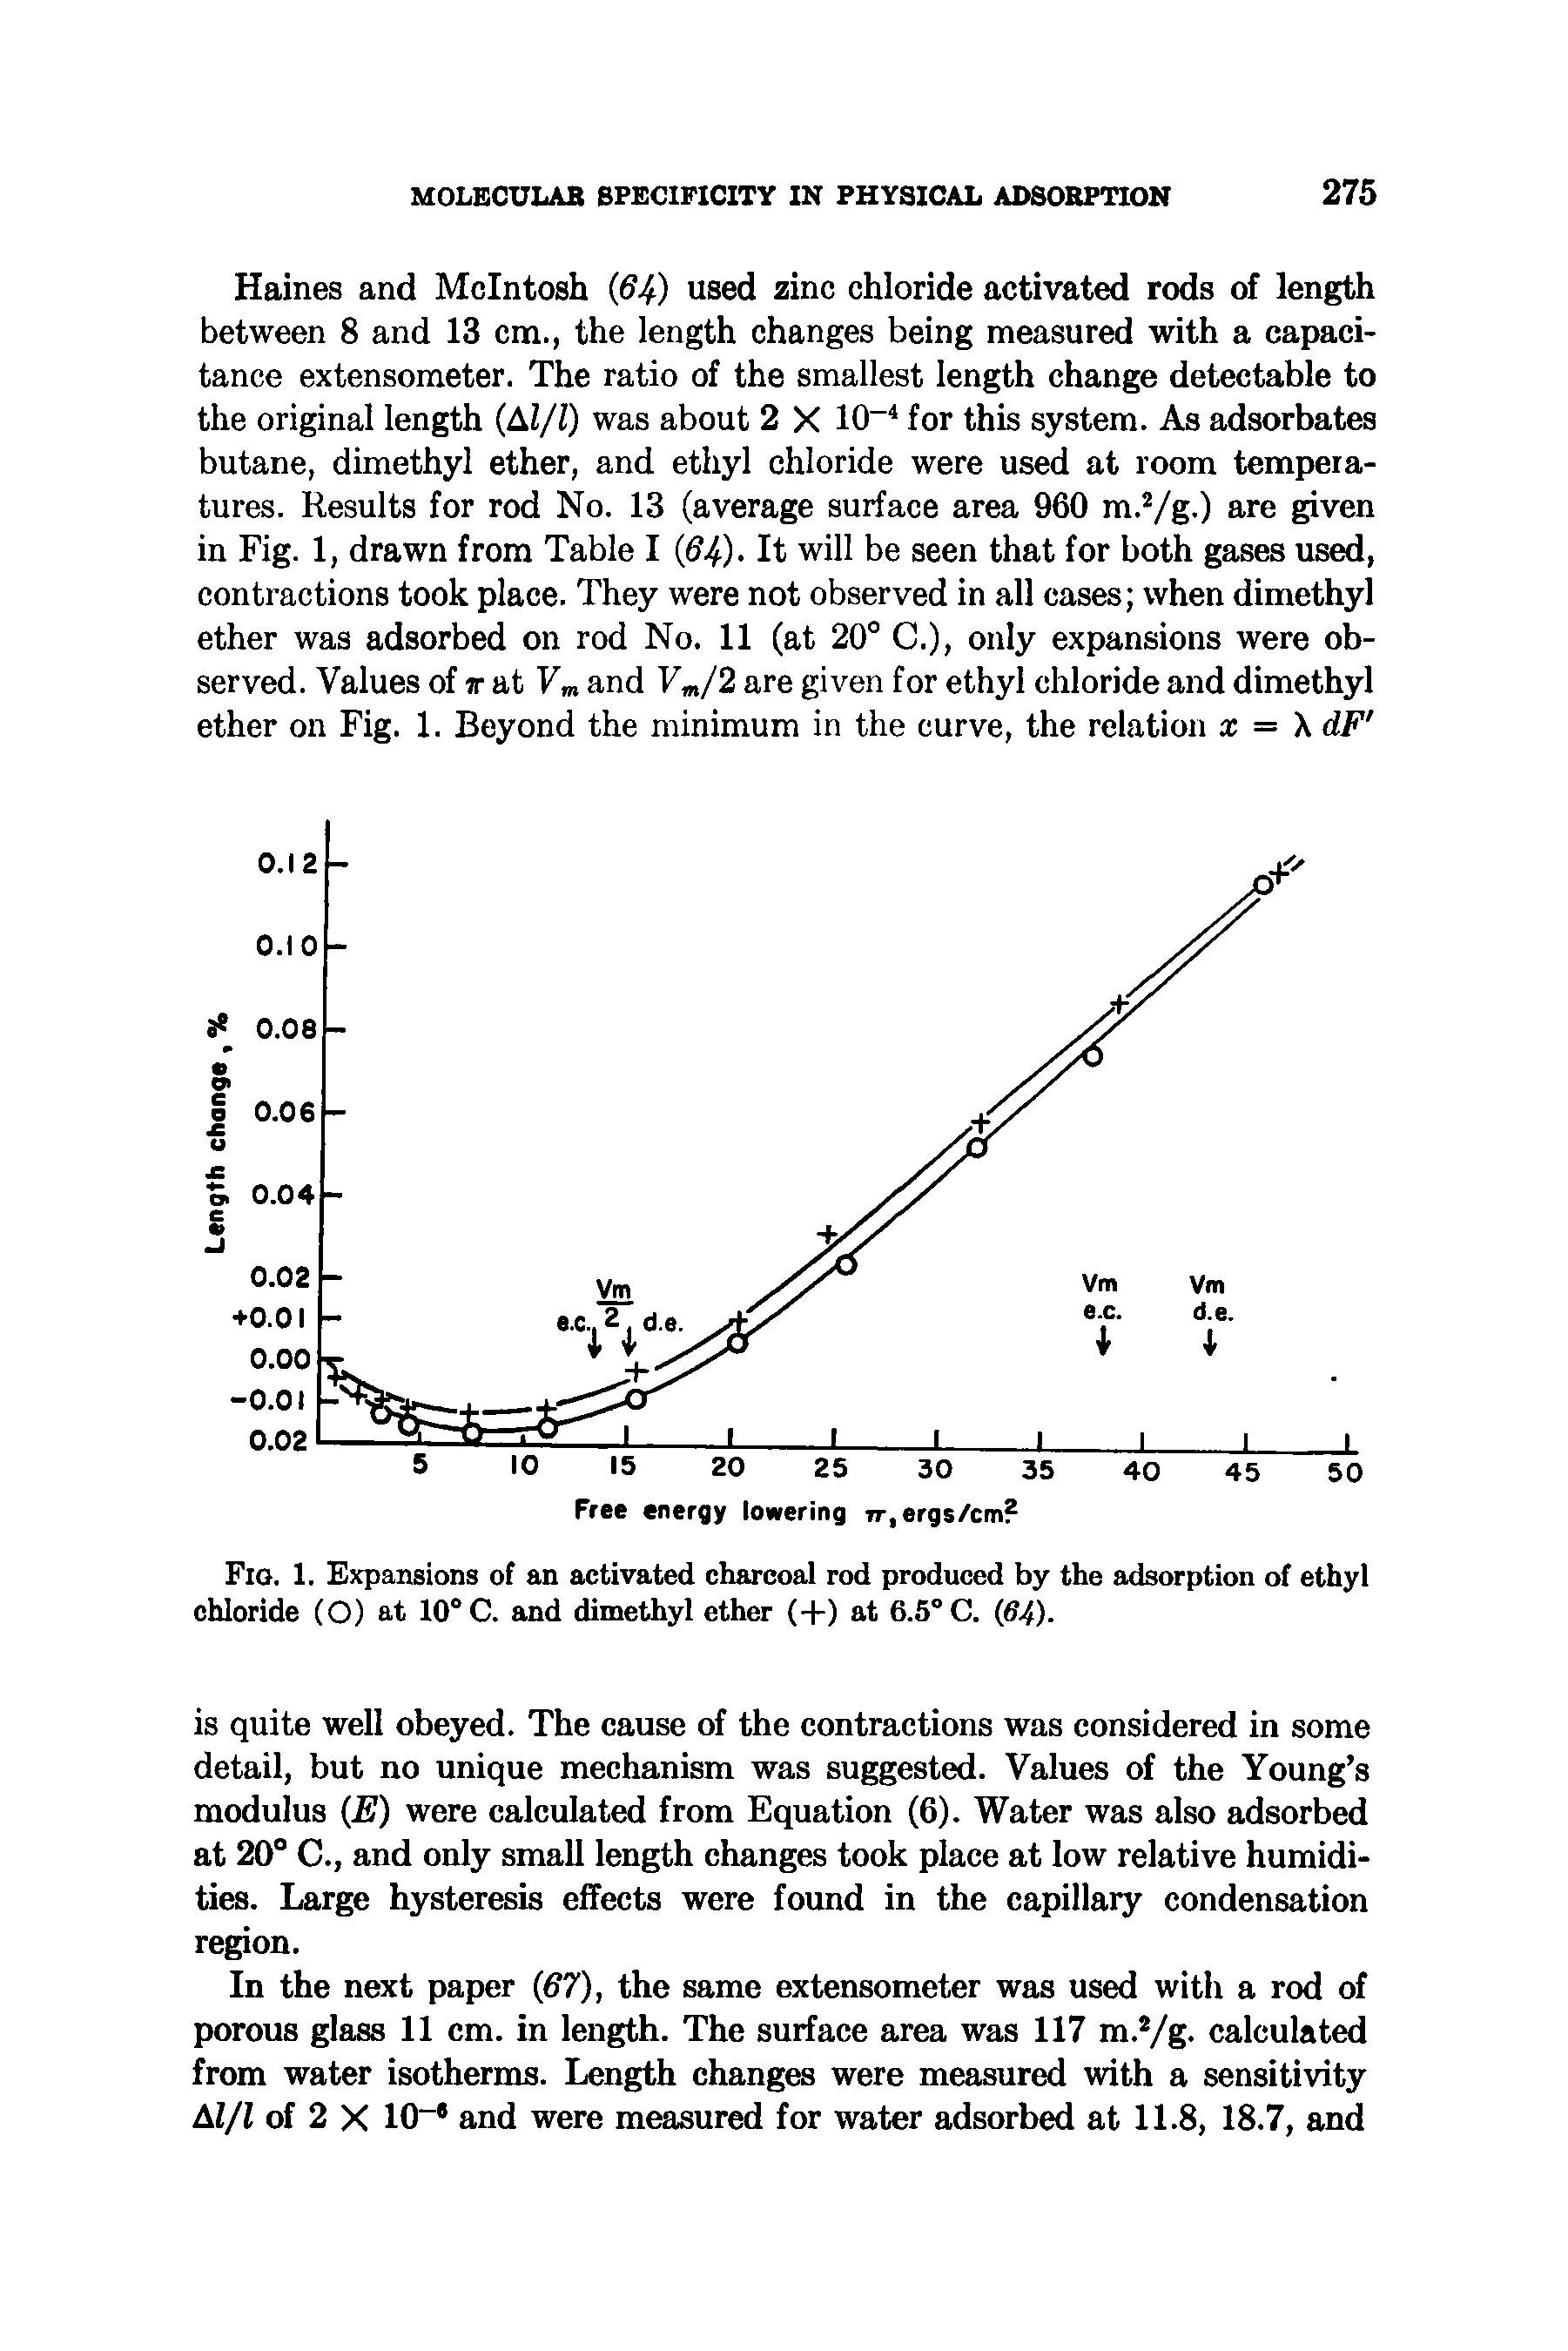 Fig. 1. Expansions of an activated charcoal rod produced by the adsorption of ethyl chloride (O) at 10 C. and dimethyl ether (-f) at 6.5 C. (64).